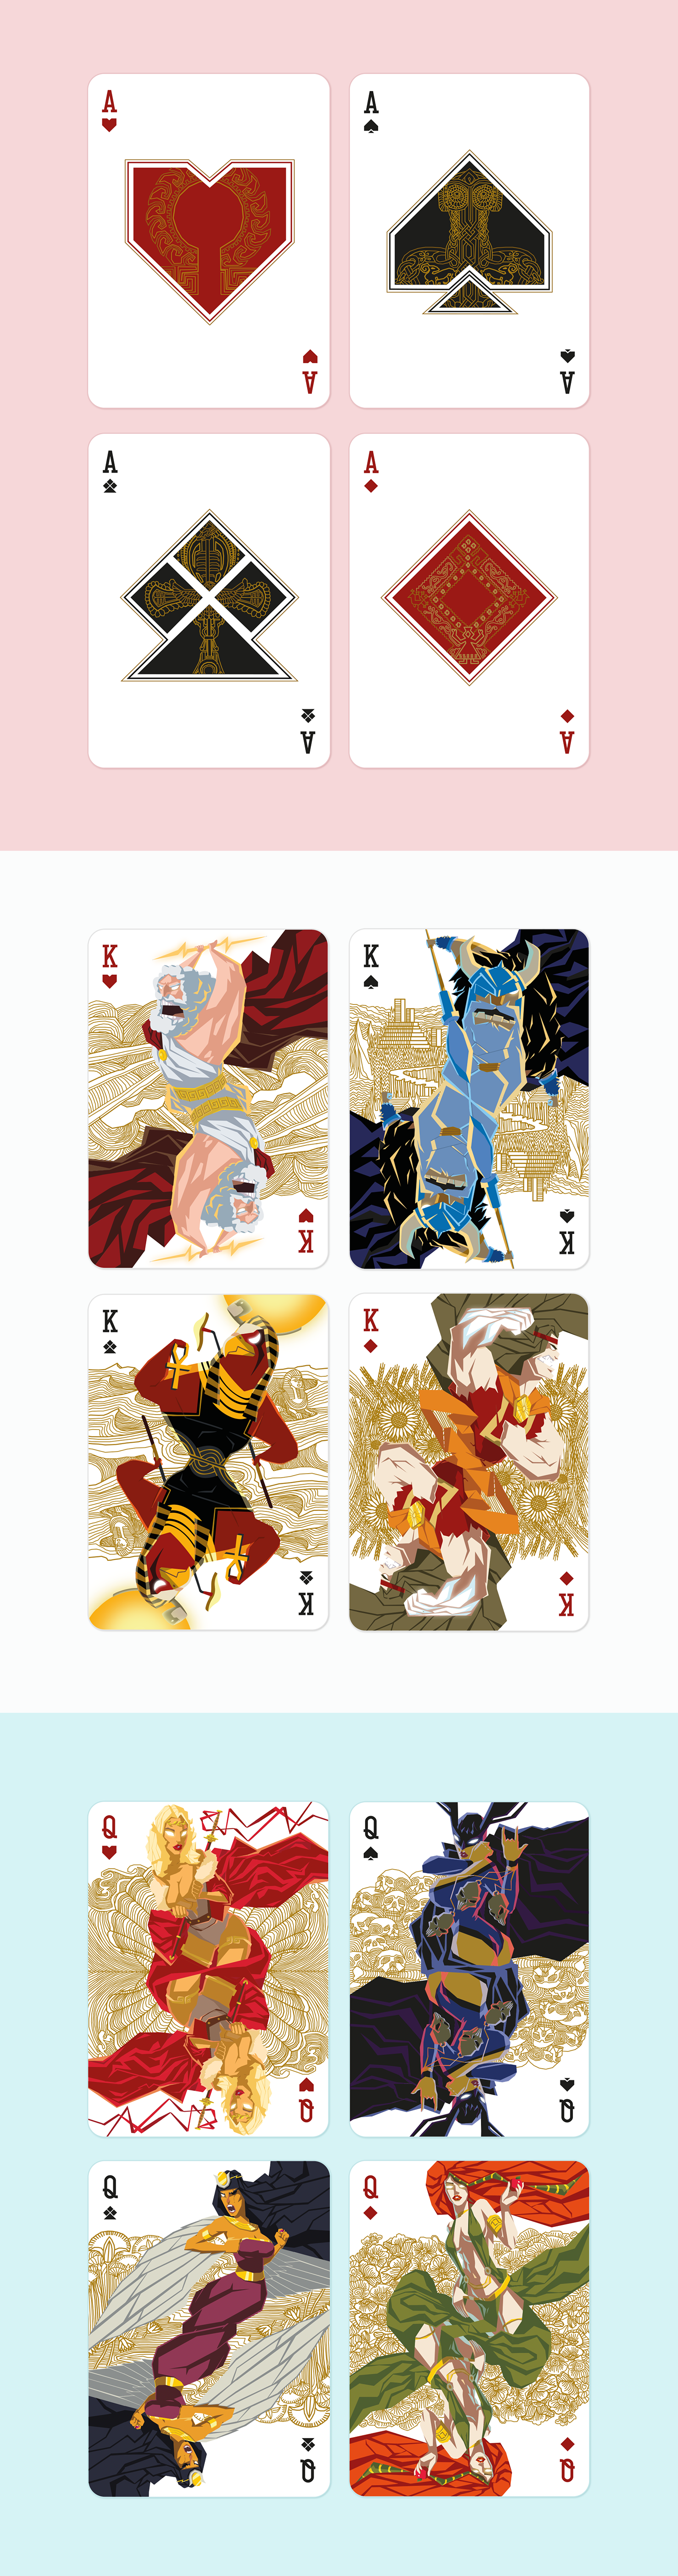 Playing Cards mythical myths mythology goddess God colorful golden pattern characters craft paper texture